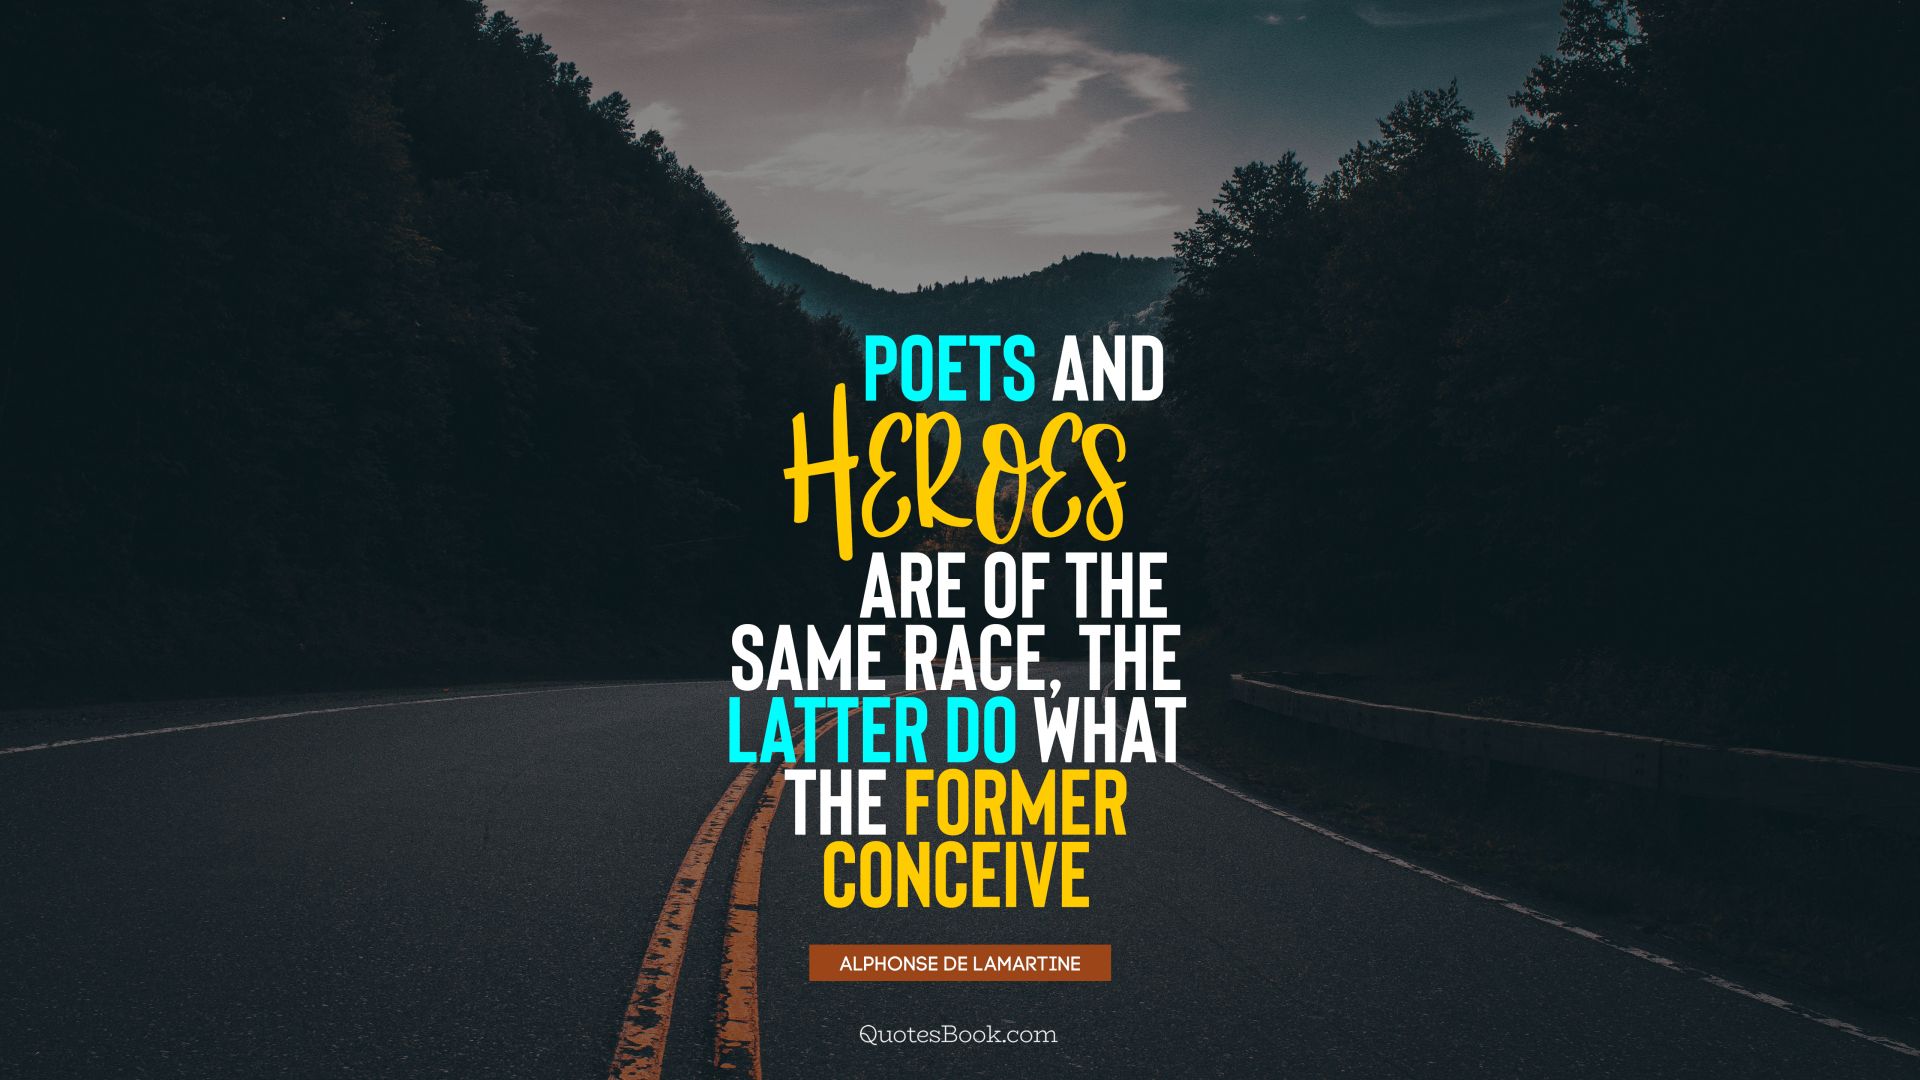 Poets and heroes are of the same race, the latter do what the former conceive. - Quote by Alphonse de Lamartine